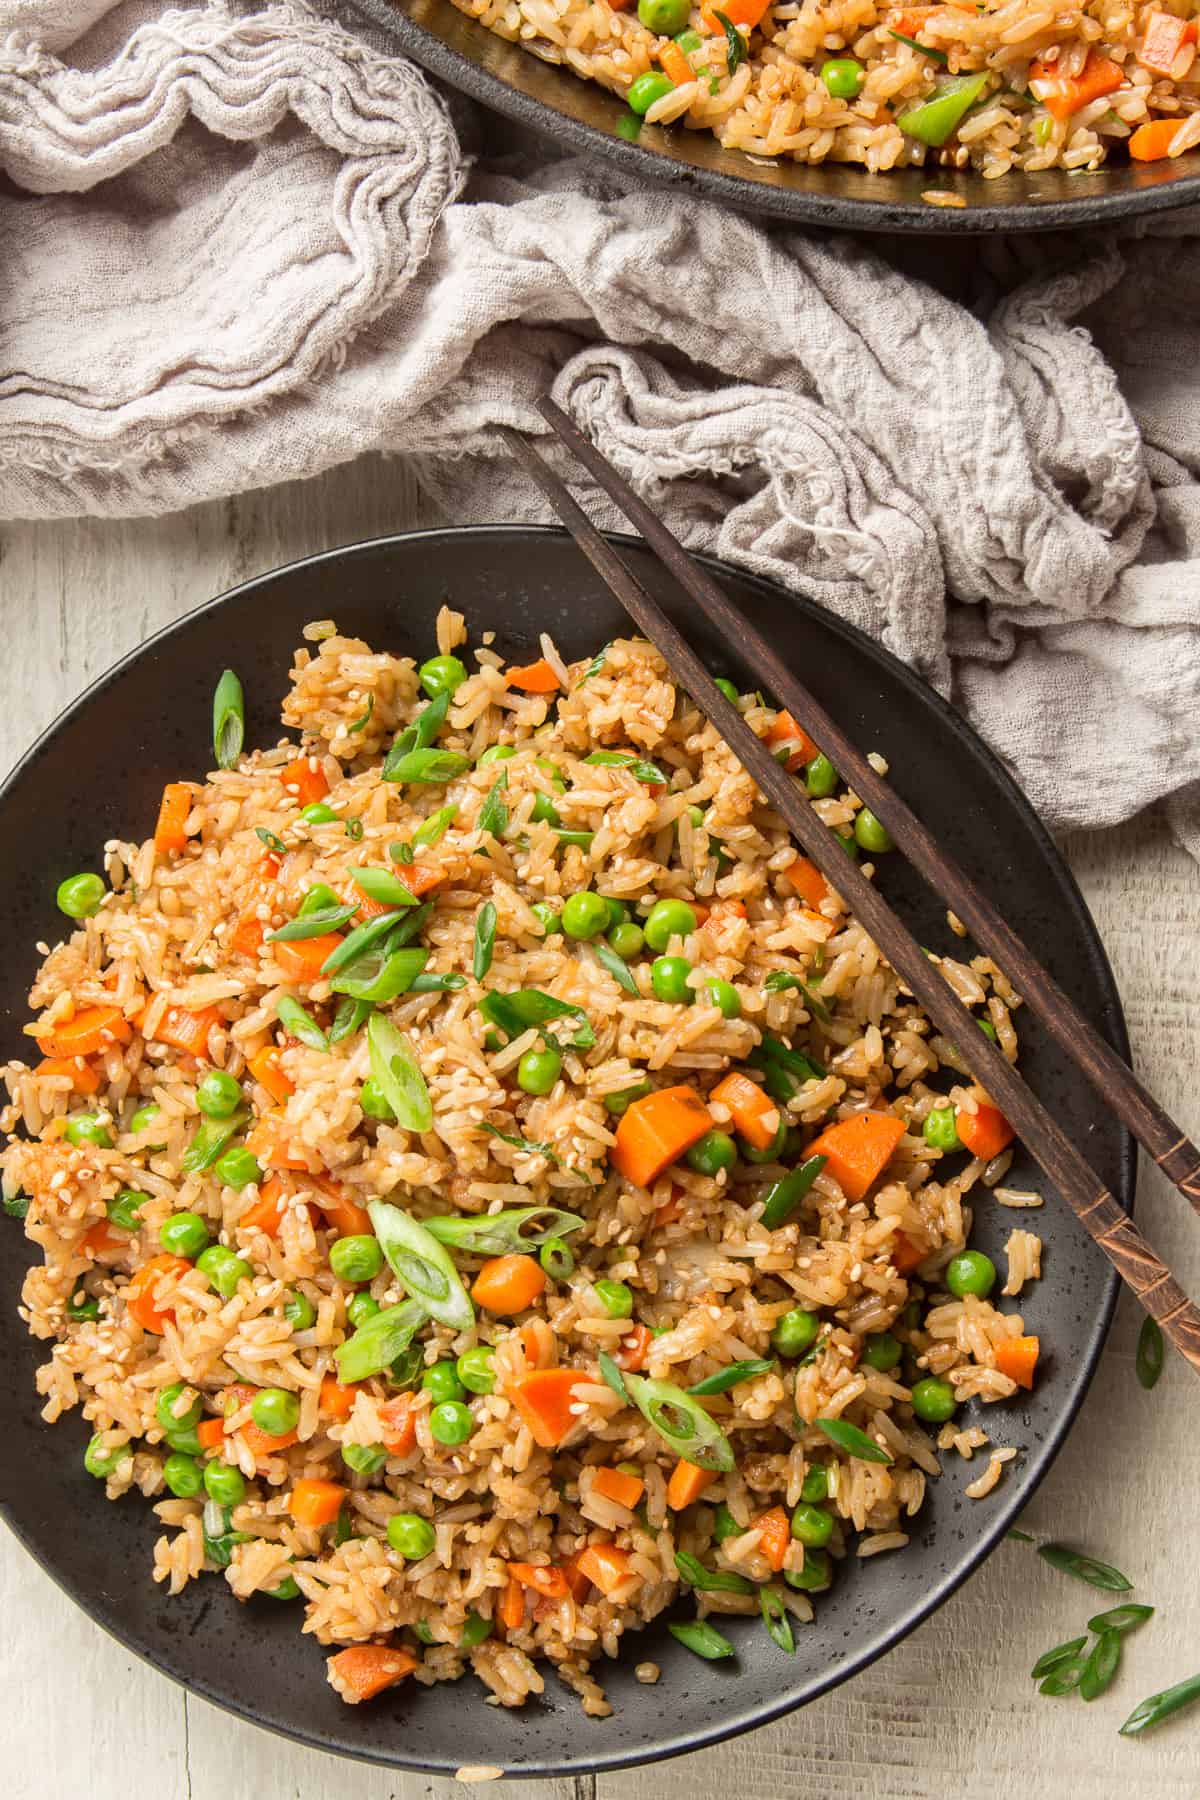 Plate of vegan fried rice with chopsticks.